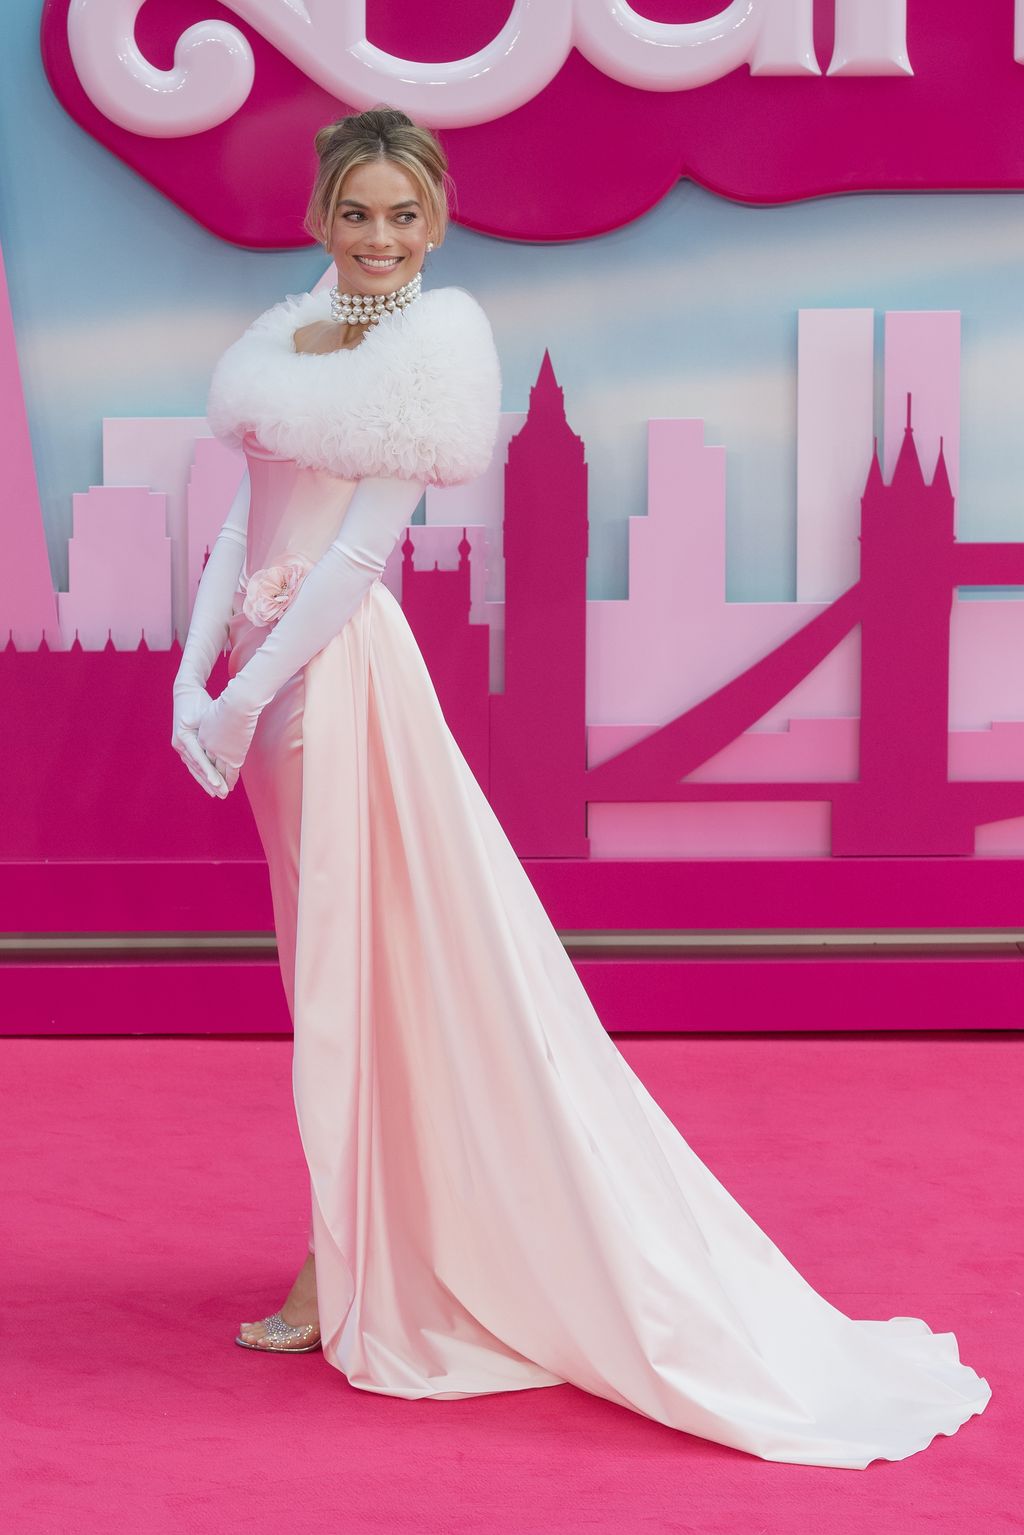 All 13 of Margot Robbie's Barbie-inspired outfits, ranked – from worst to  best: she turned heads on the 'pink carpet' in Chanel jewellery and dresses  by Versace, Valentino, Balmain, Moschino and more